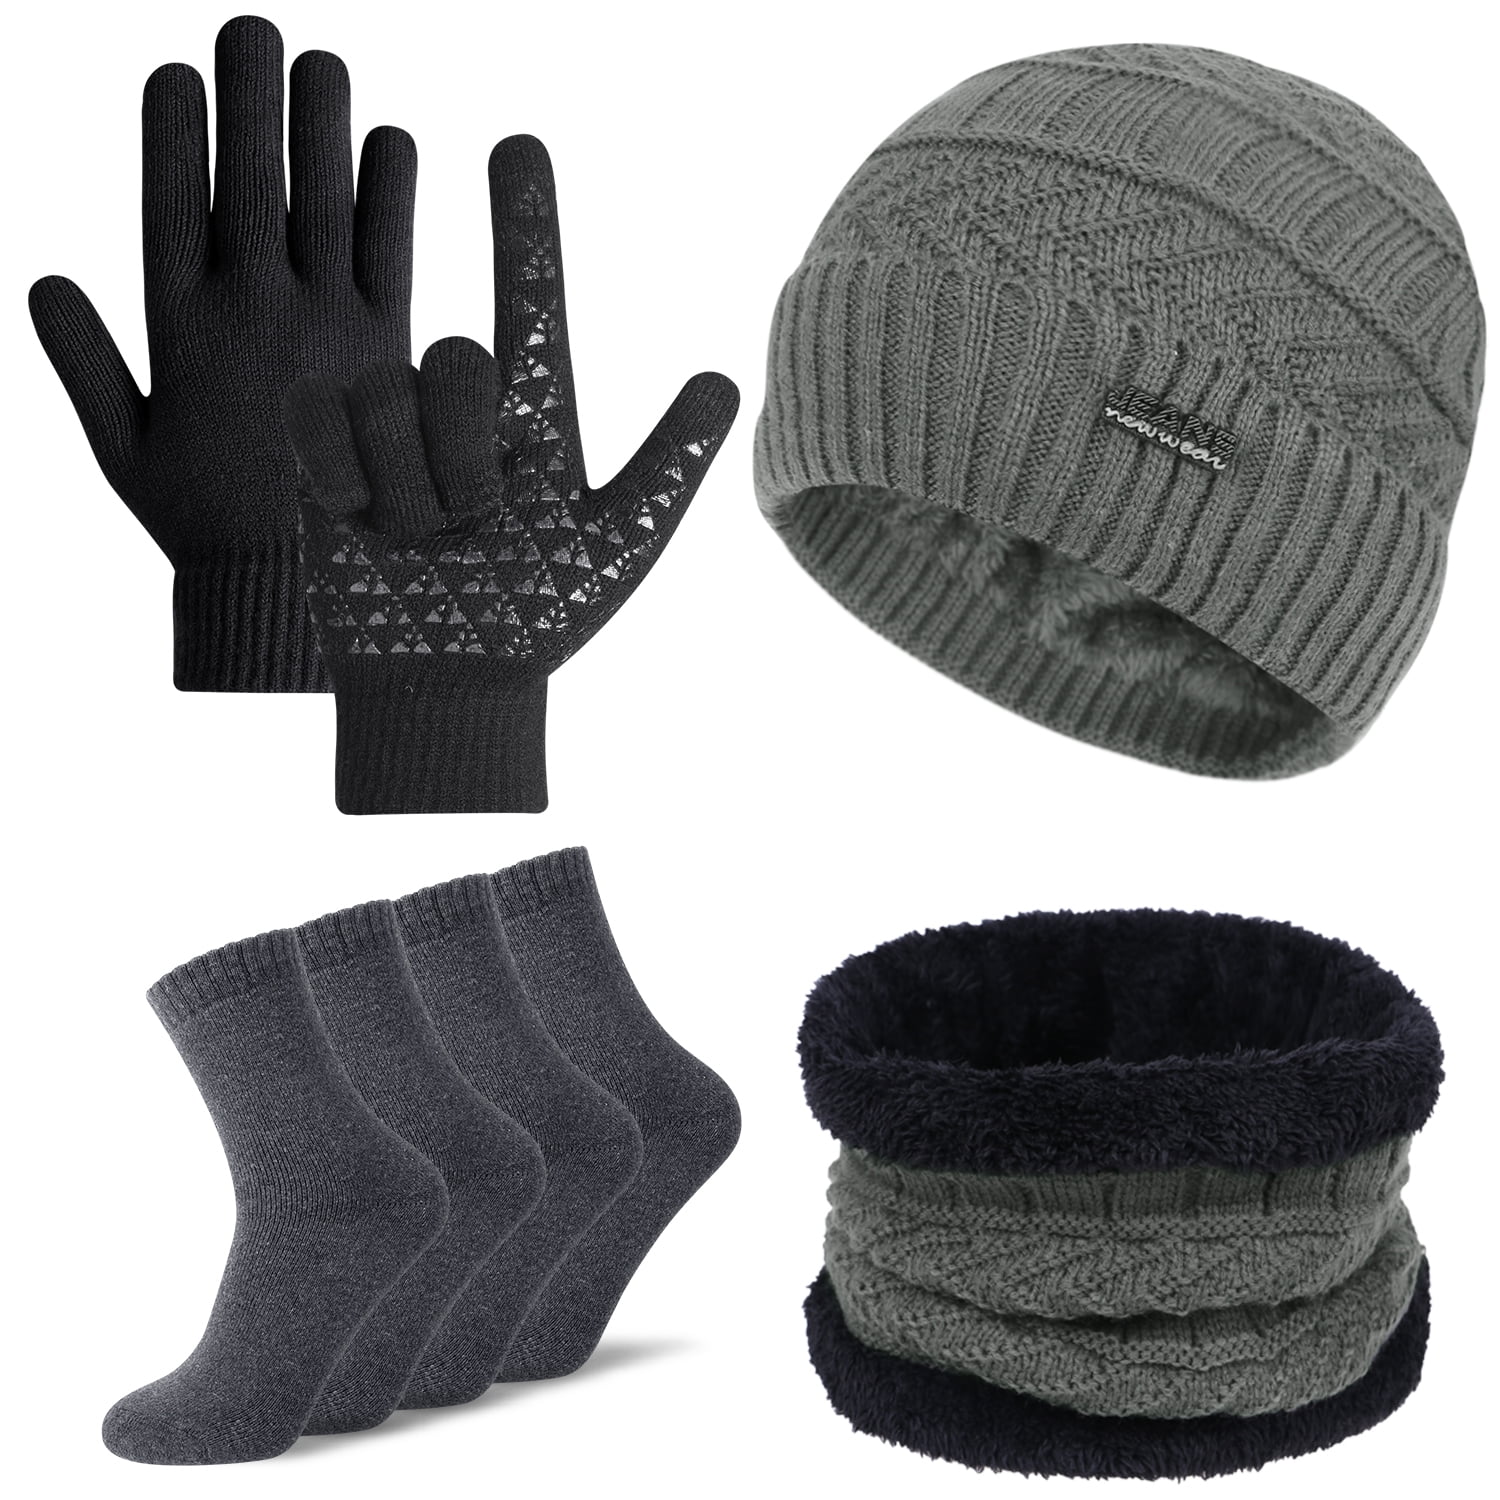 Hats and Gloves Collection for Women